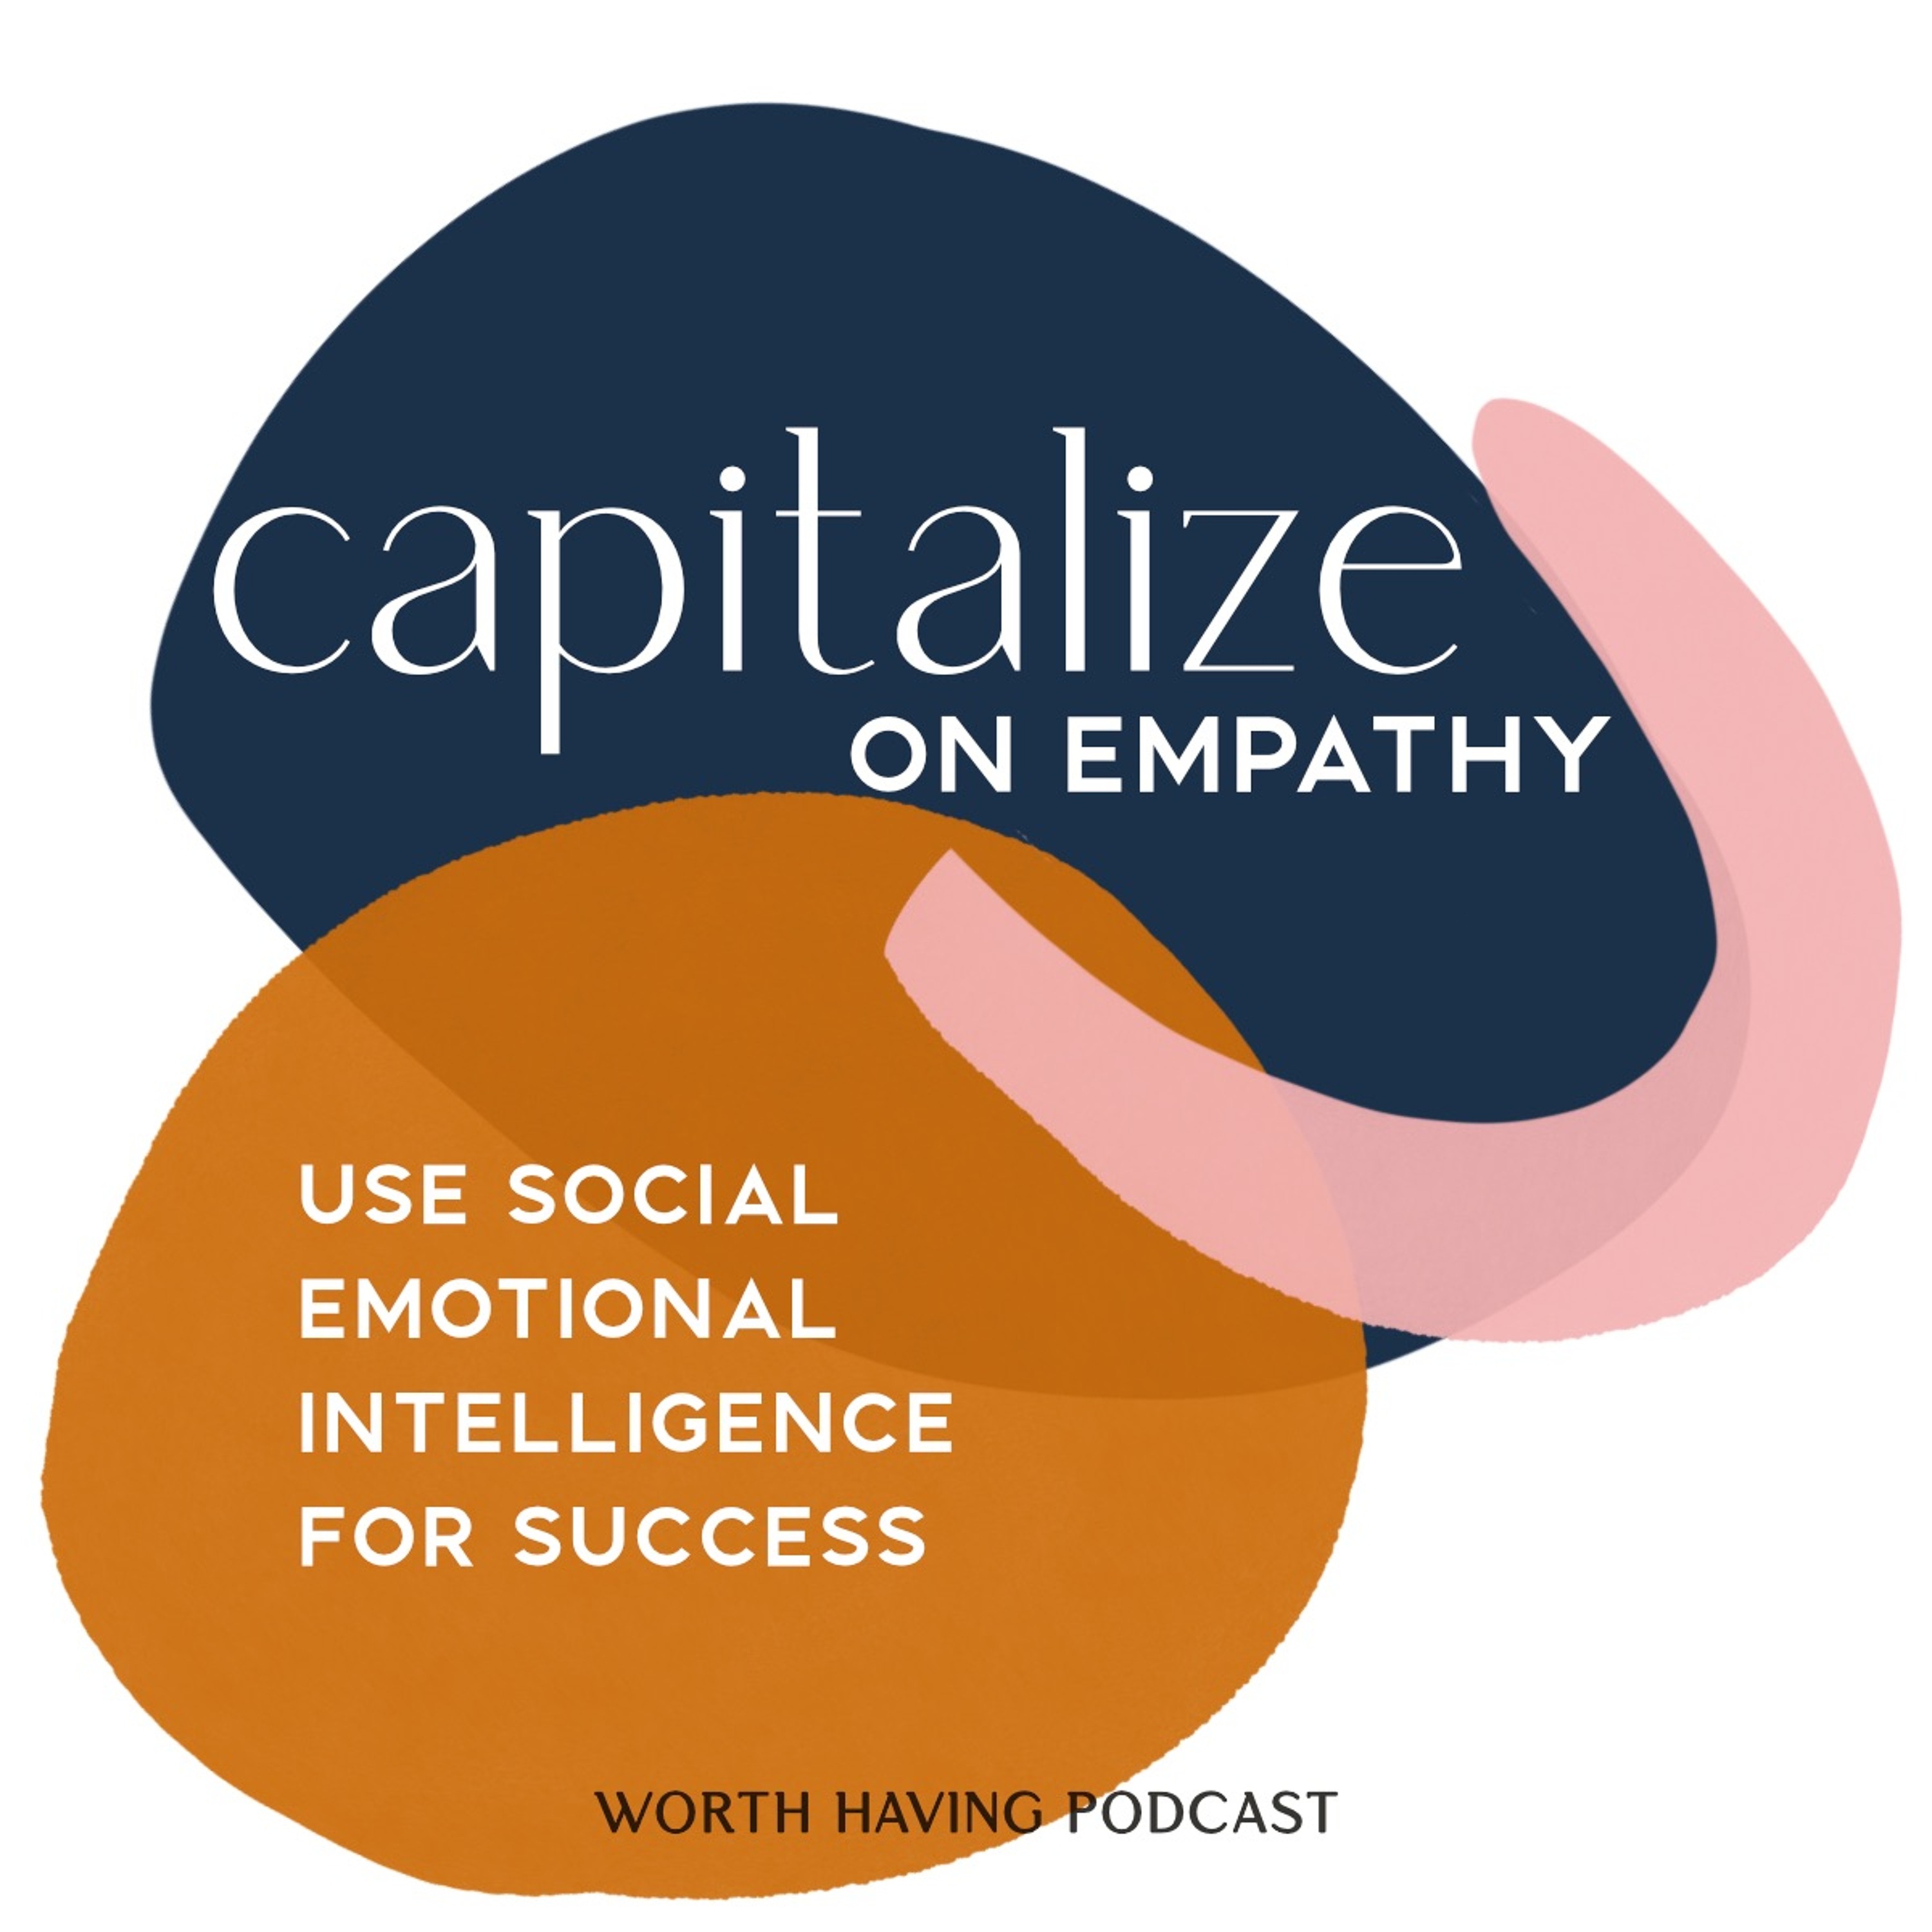 Capitalize on empathy. Social Emotional Intelligence for success